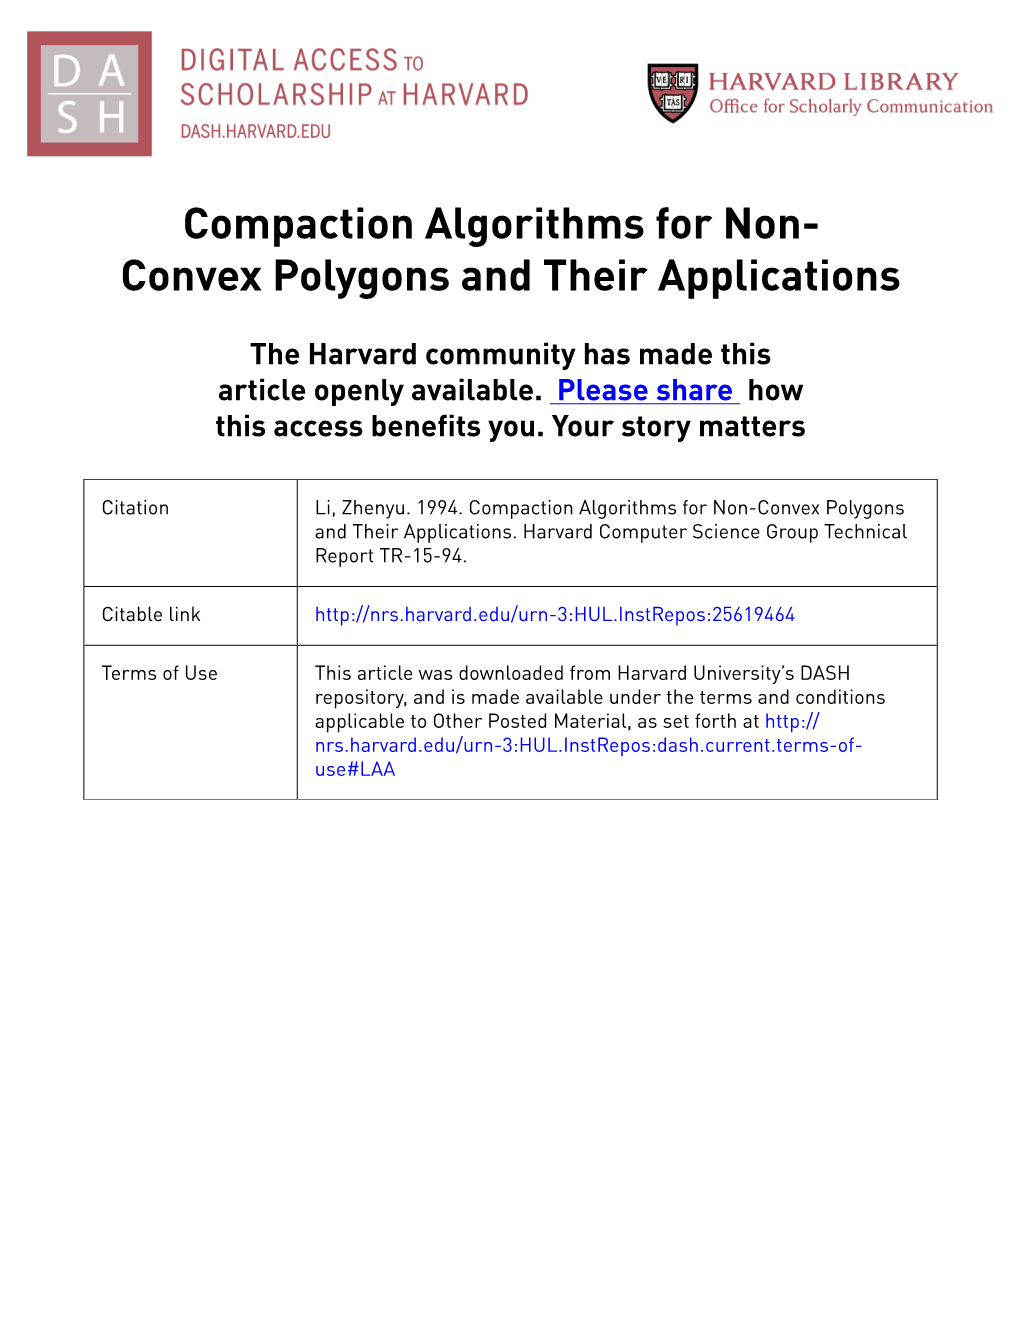 Compaction Algorithms for Non- Convex Polygons and Their Applications